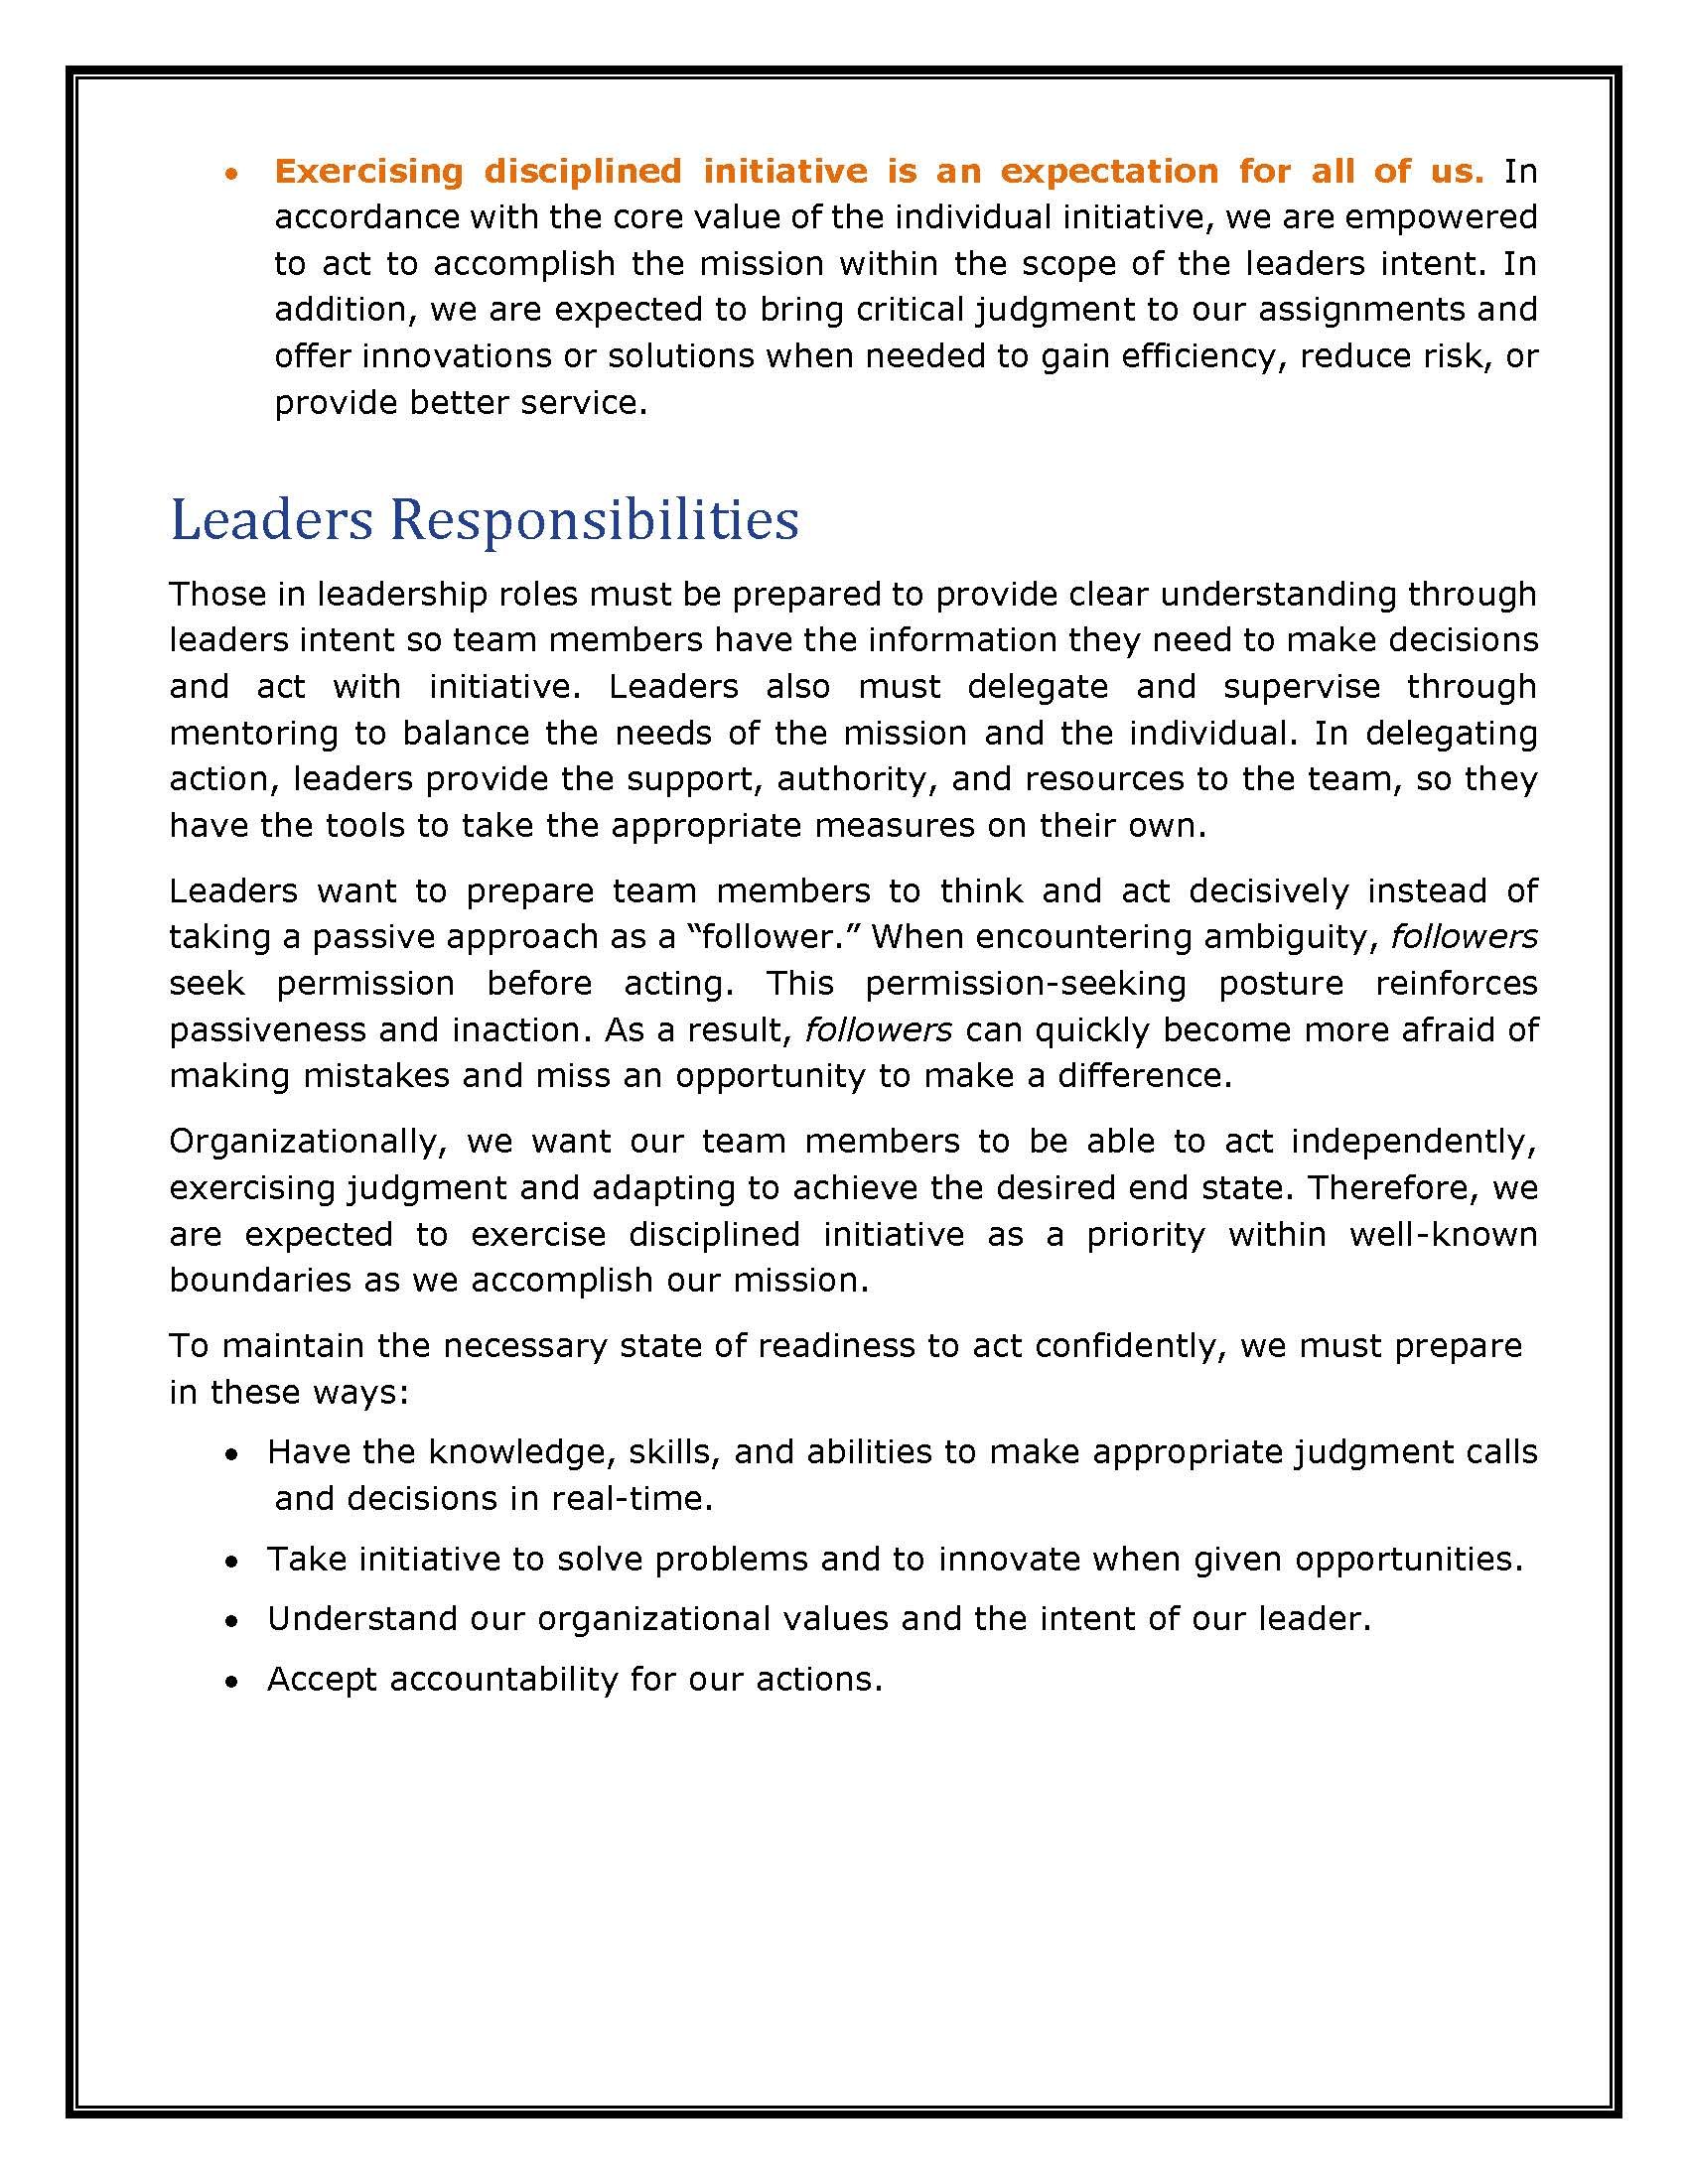 Leaders Intent Based Decisions #3_Page_03.jpg